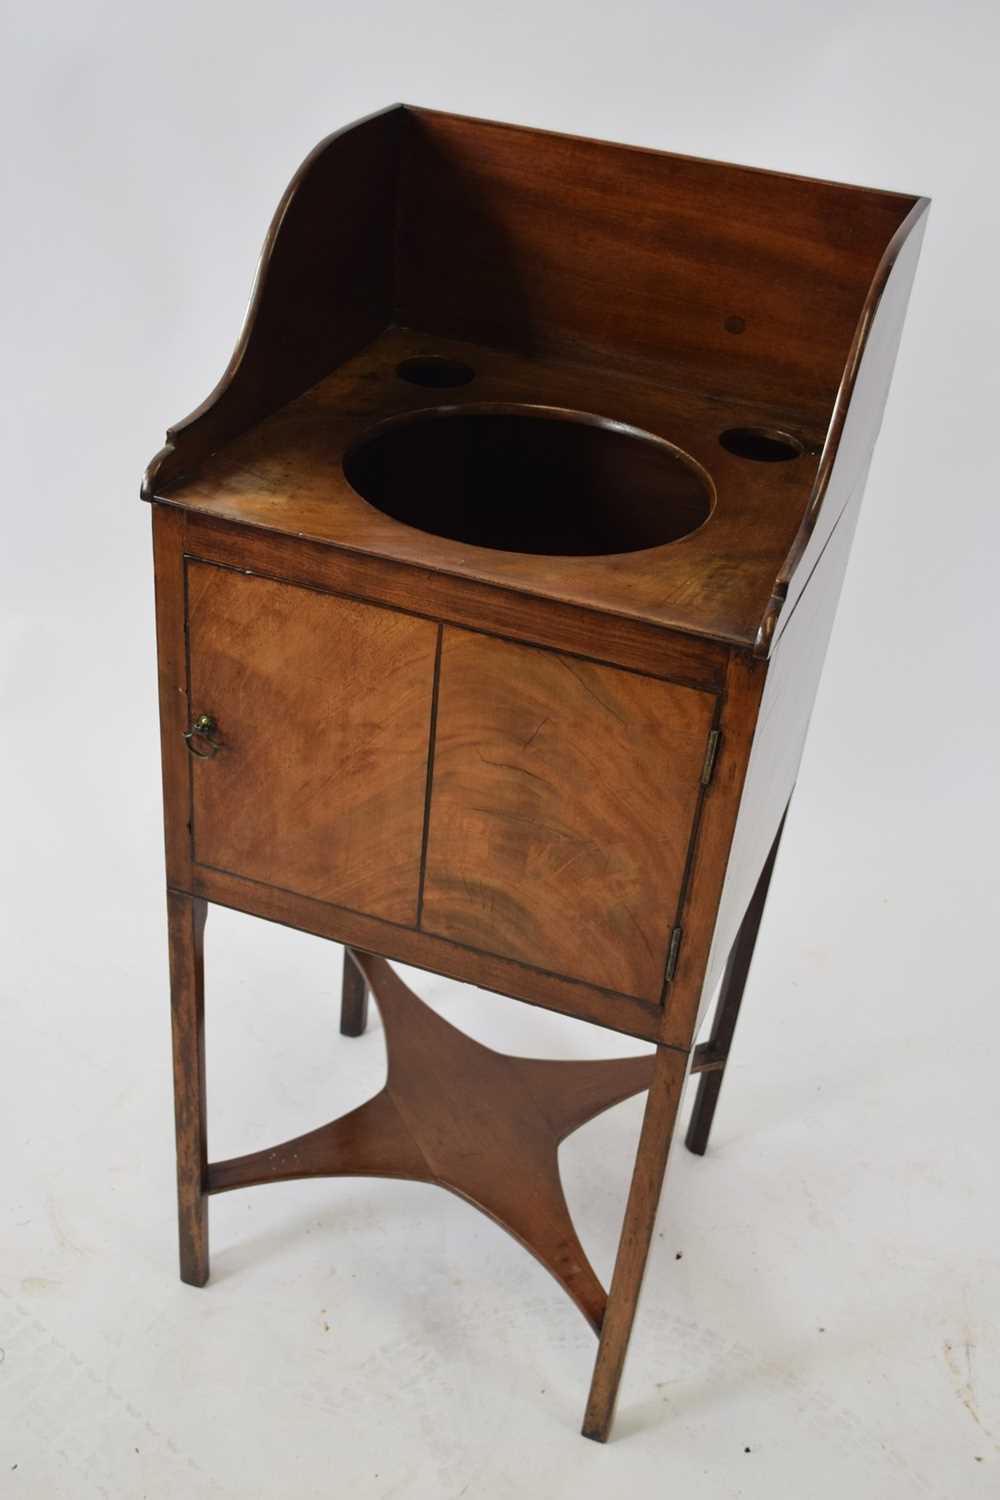 19th century mahogany wash stand of square form with galleried back, three apertures and a single